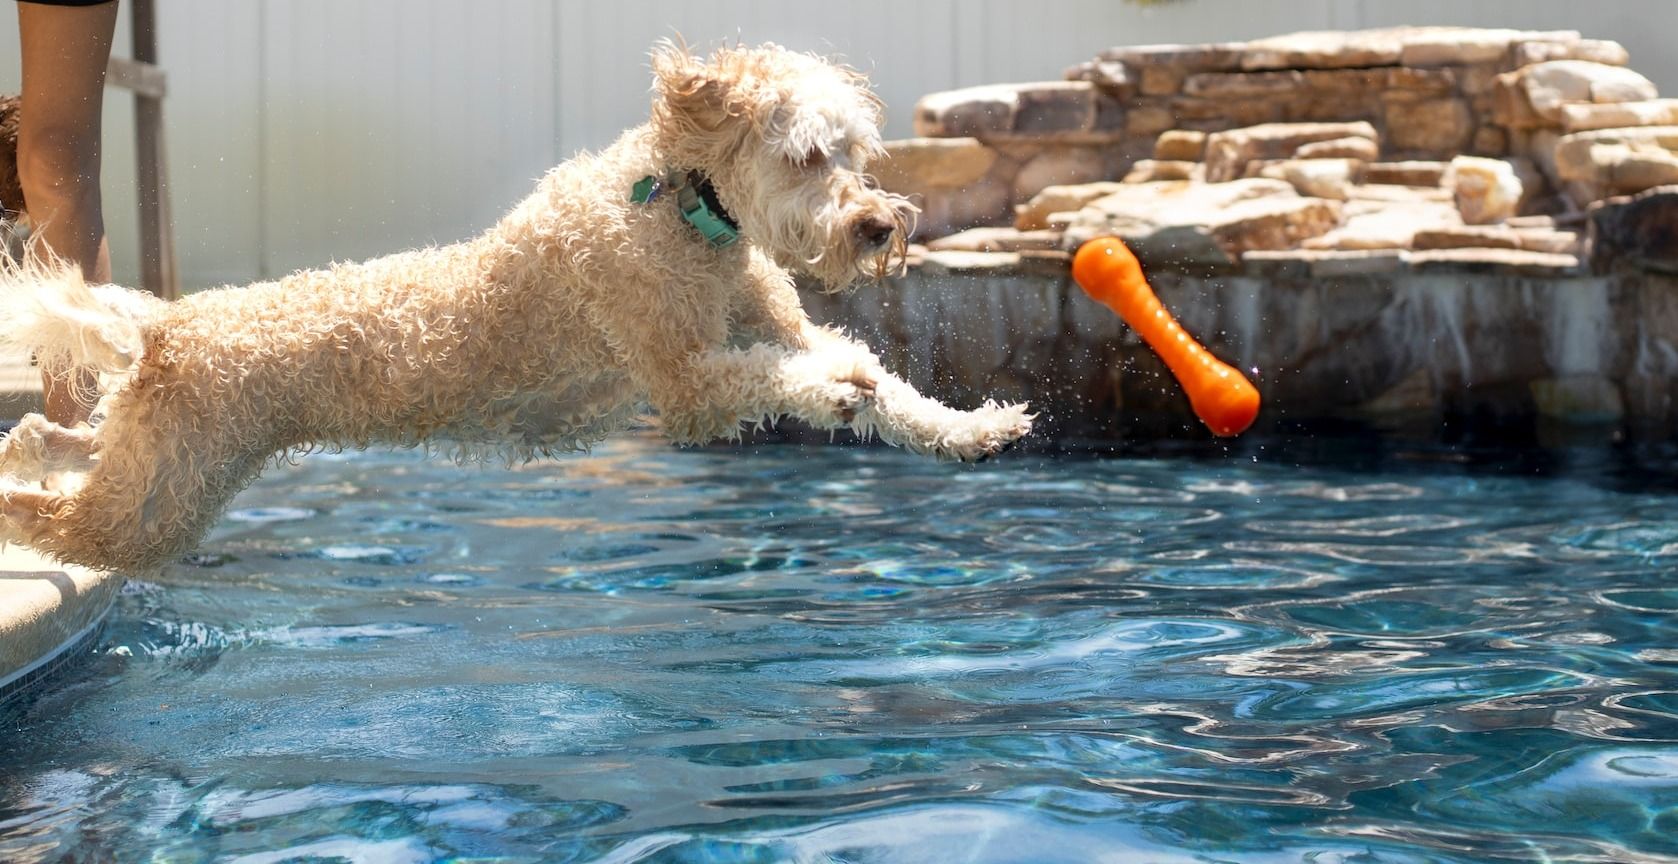 white poodle in water during daytime